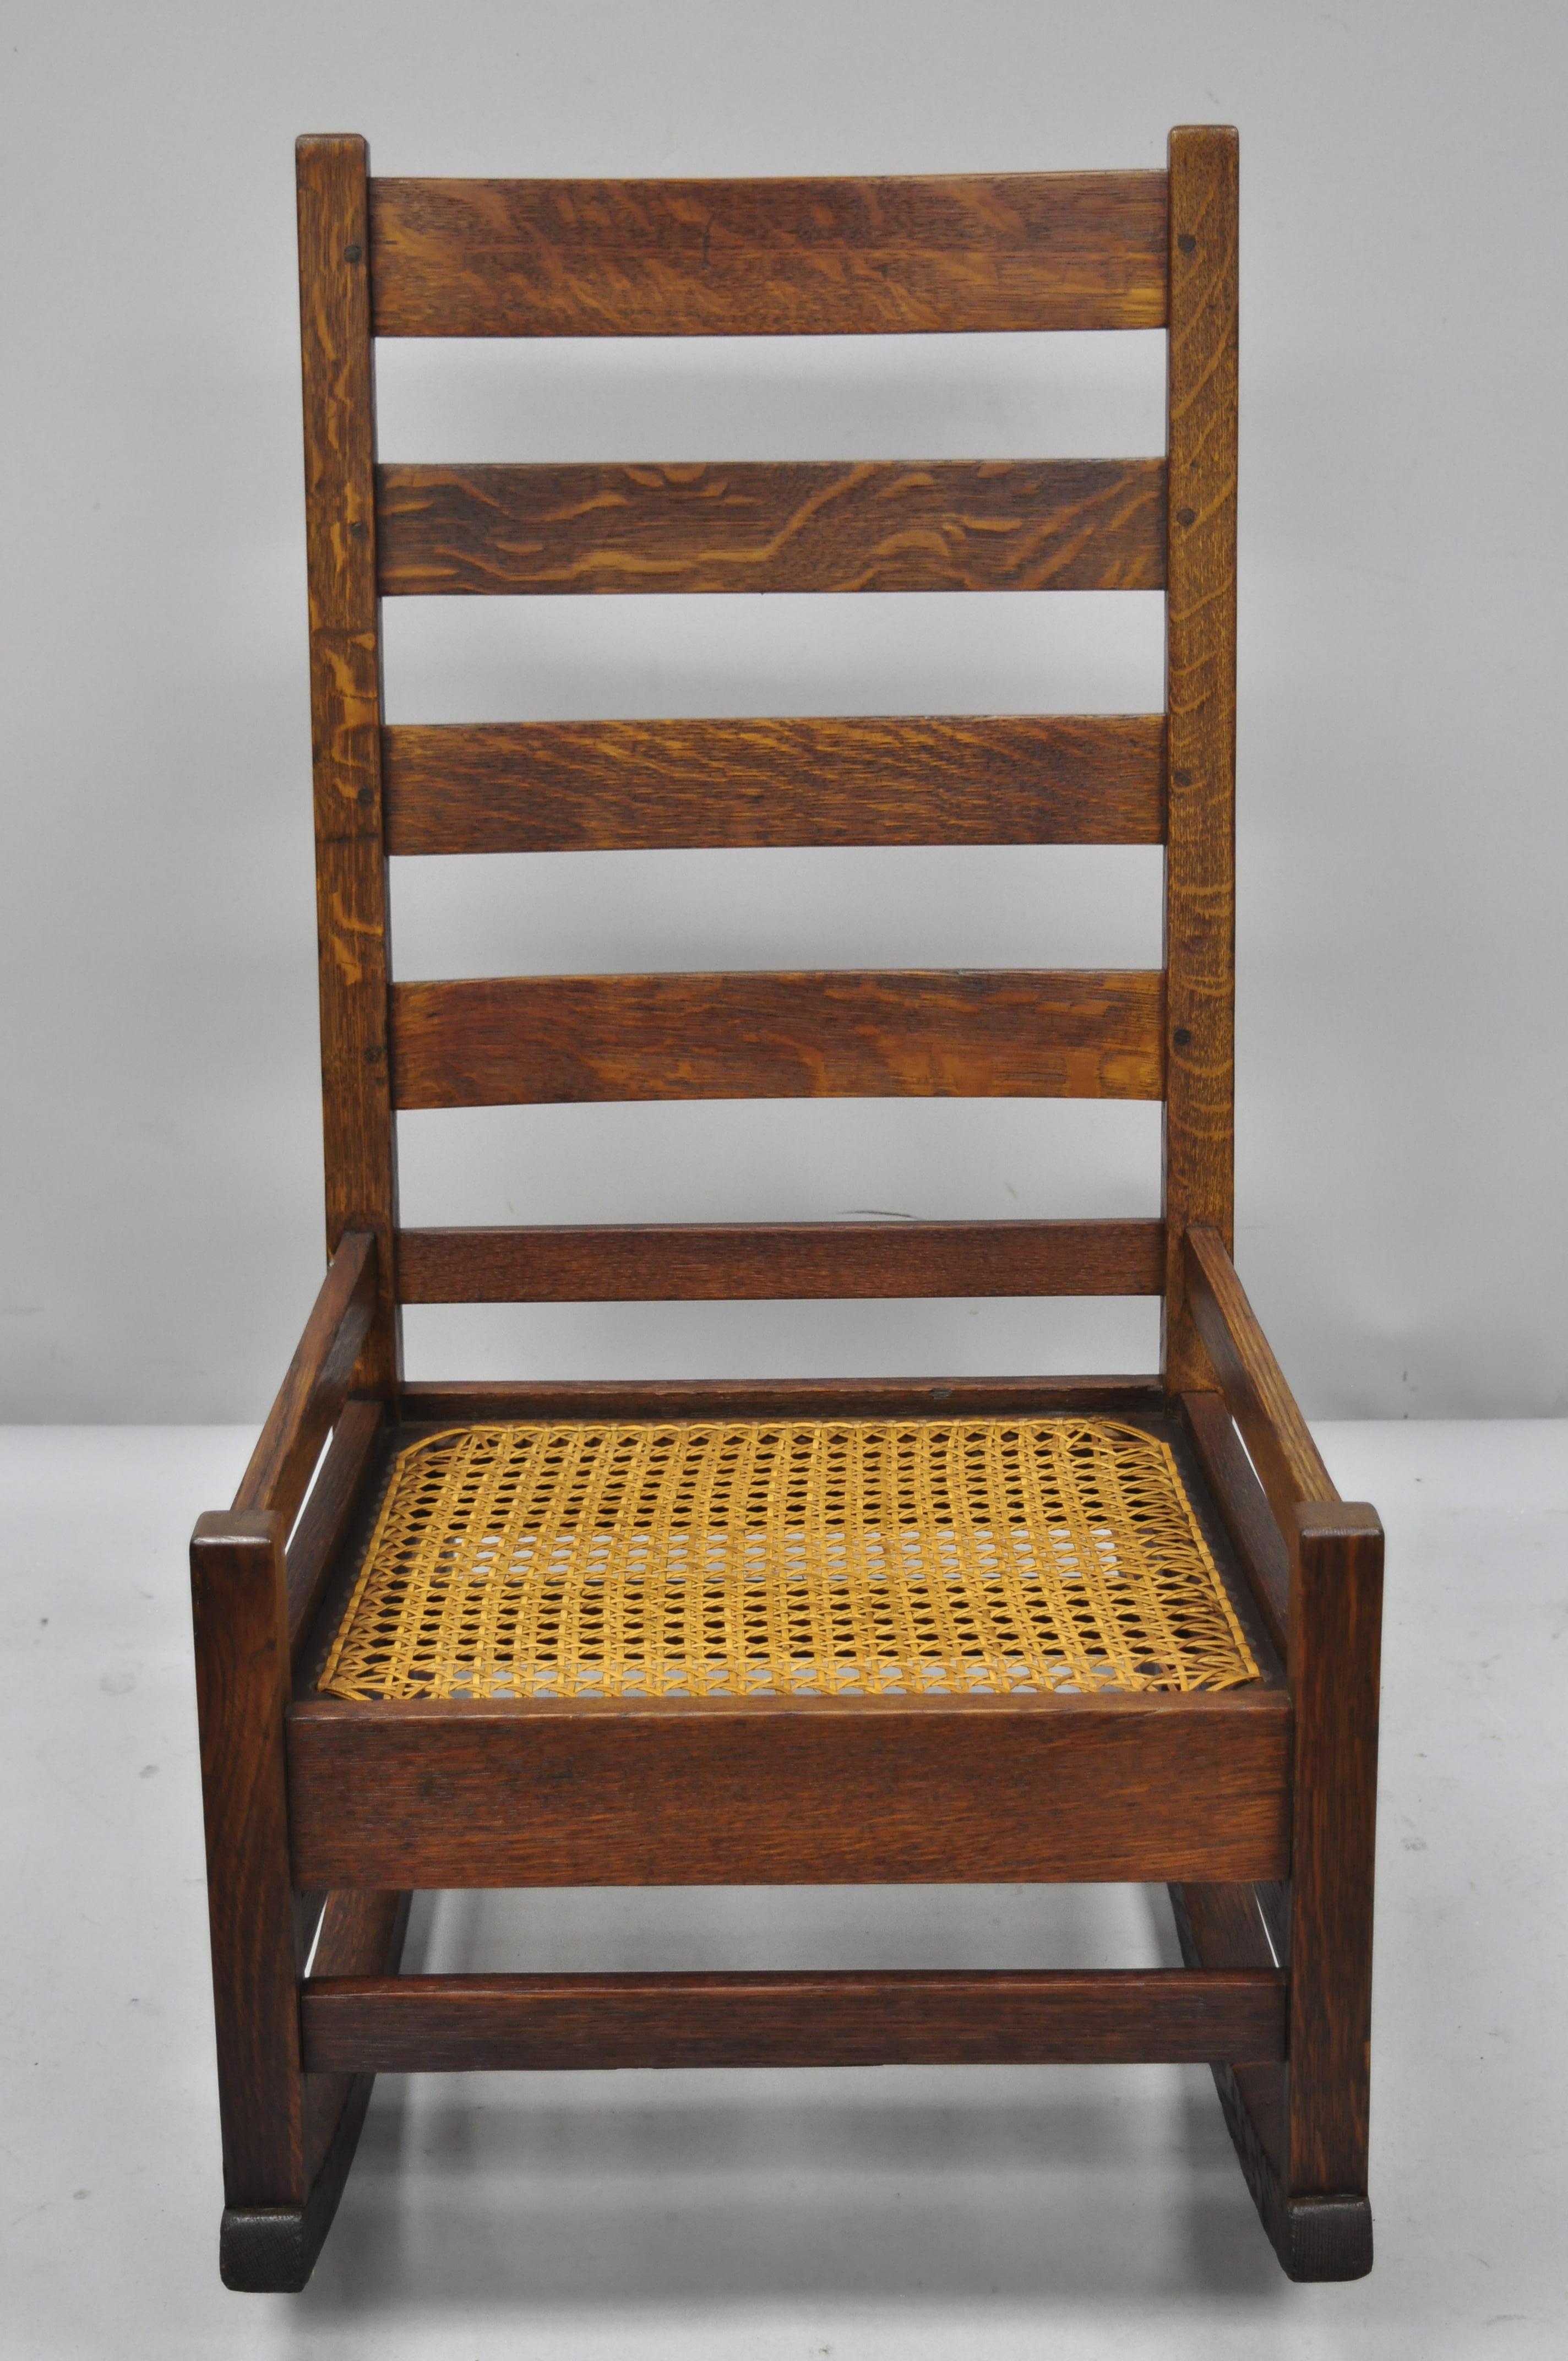 Antique Arts & Crafts mission oak ladder back hip rail rocking chair. Cane seat, ladder back exposed dowel joinery, solid wood construction, beautiful wood grain, very nice antique item, unsigned but possibly by Stickley, circa 1900. Measurements: